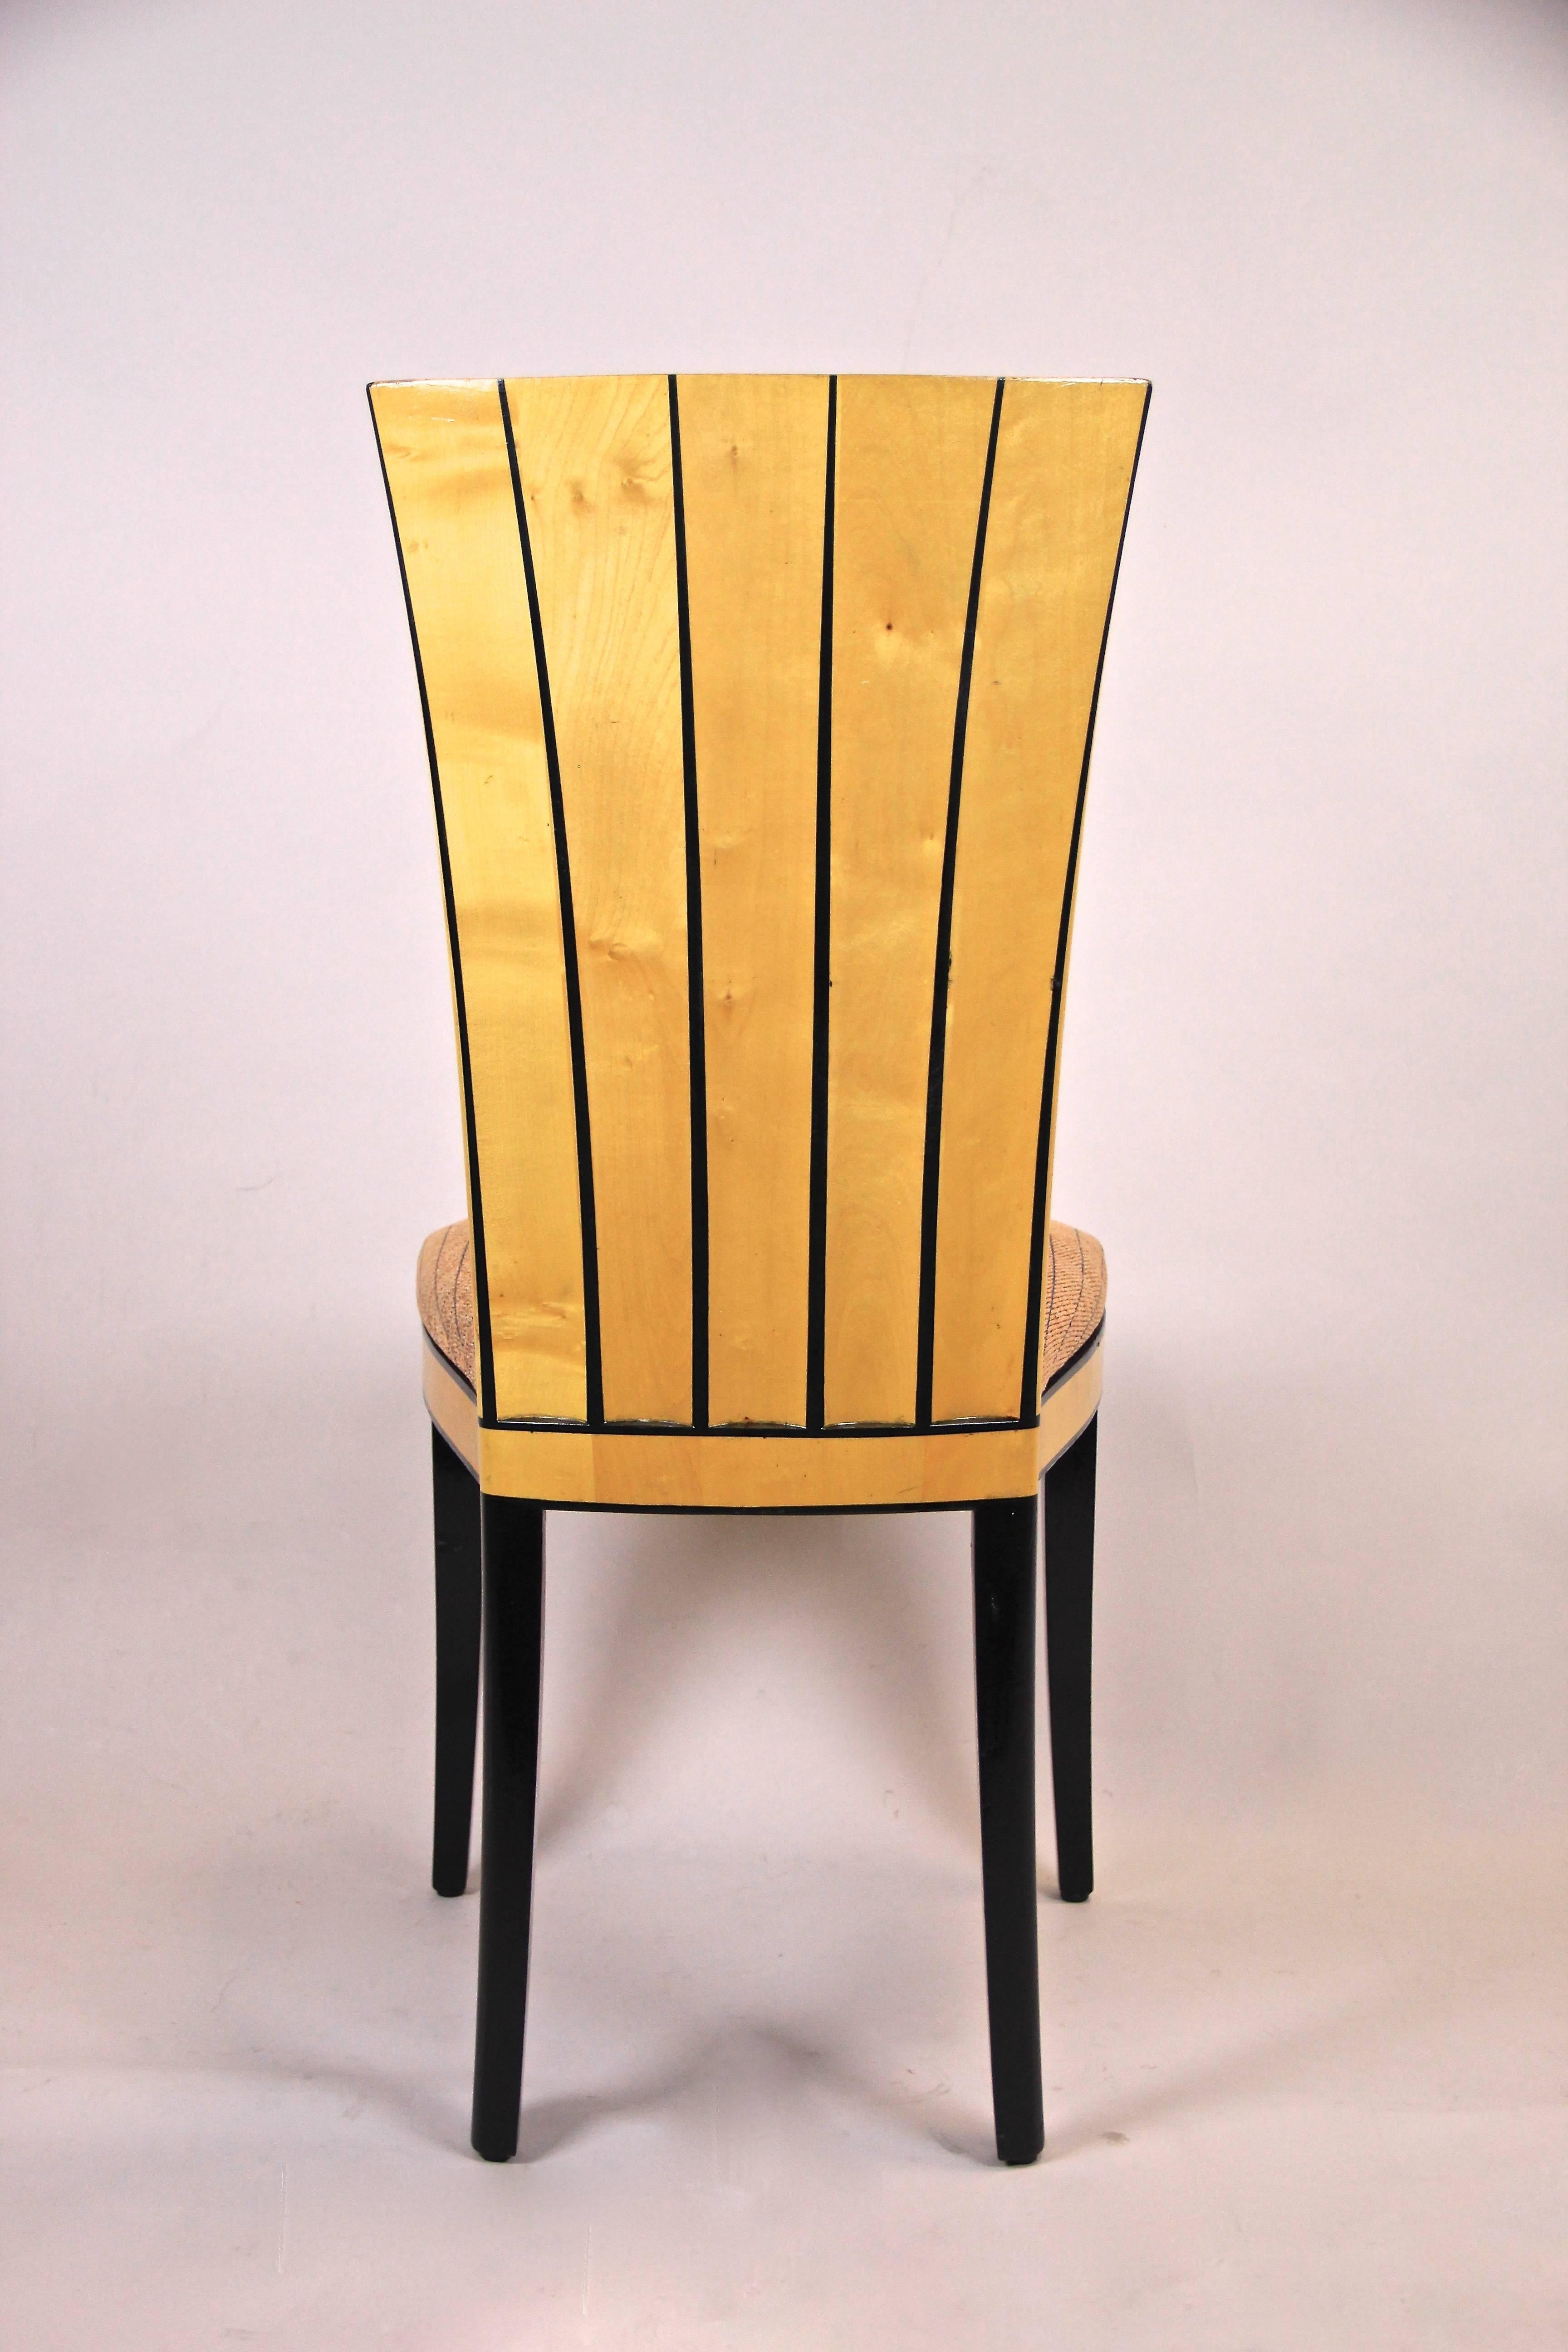 20th Century Set of Six Dining Room Chairs Saarinen House by Adelta, Finland, circa 1983